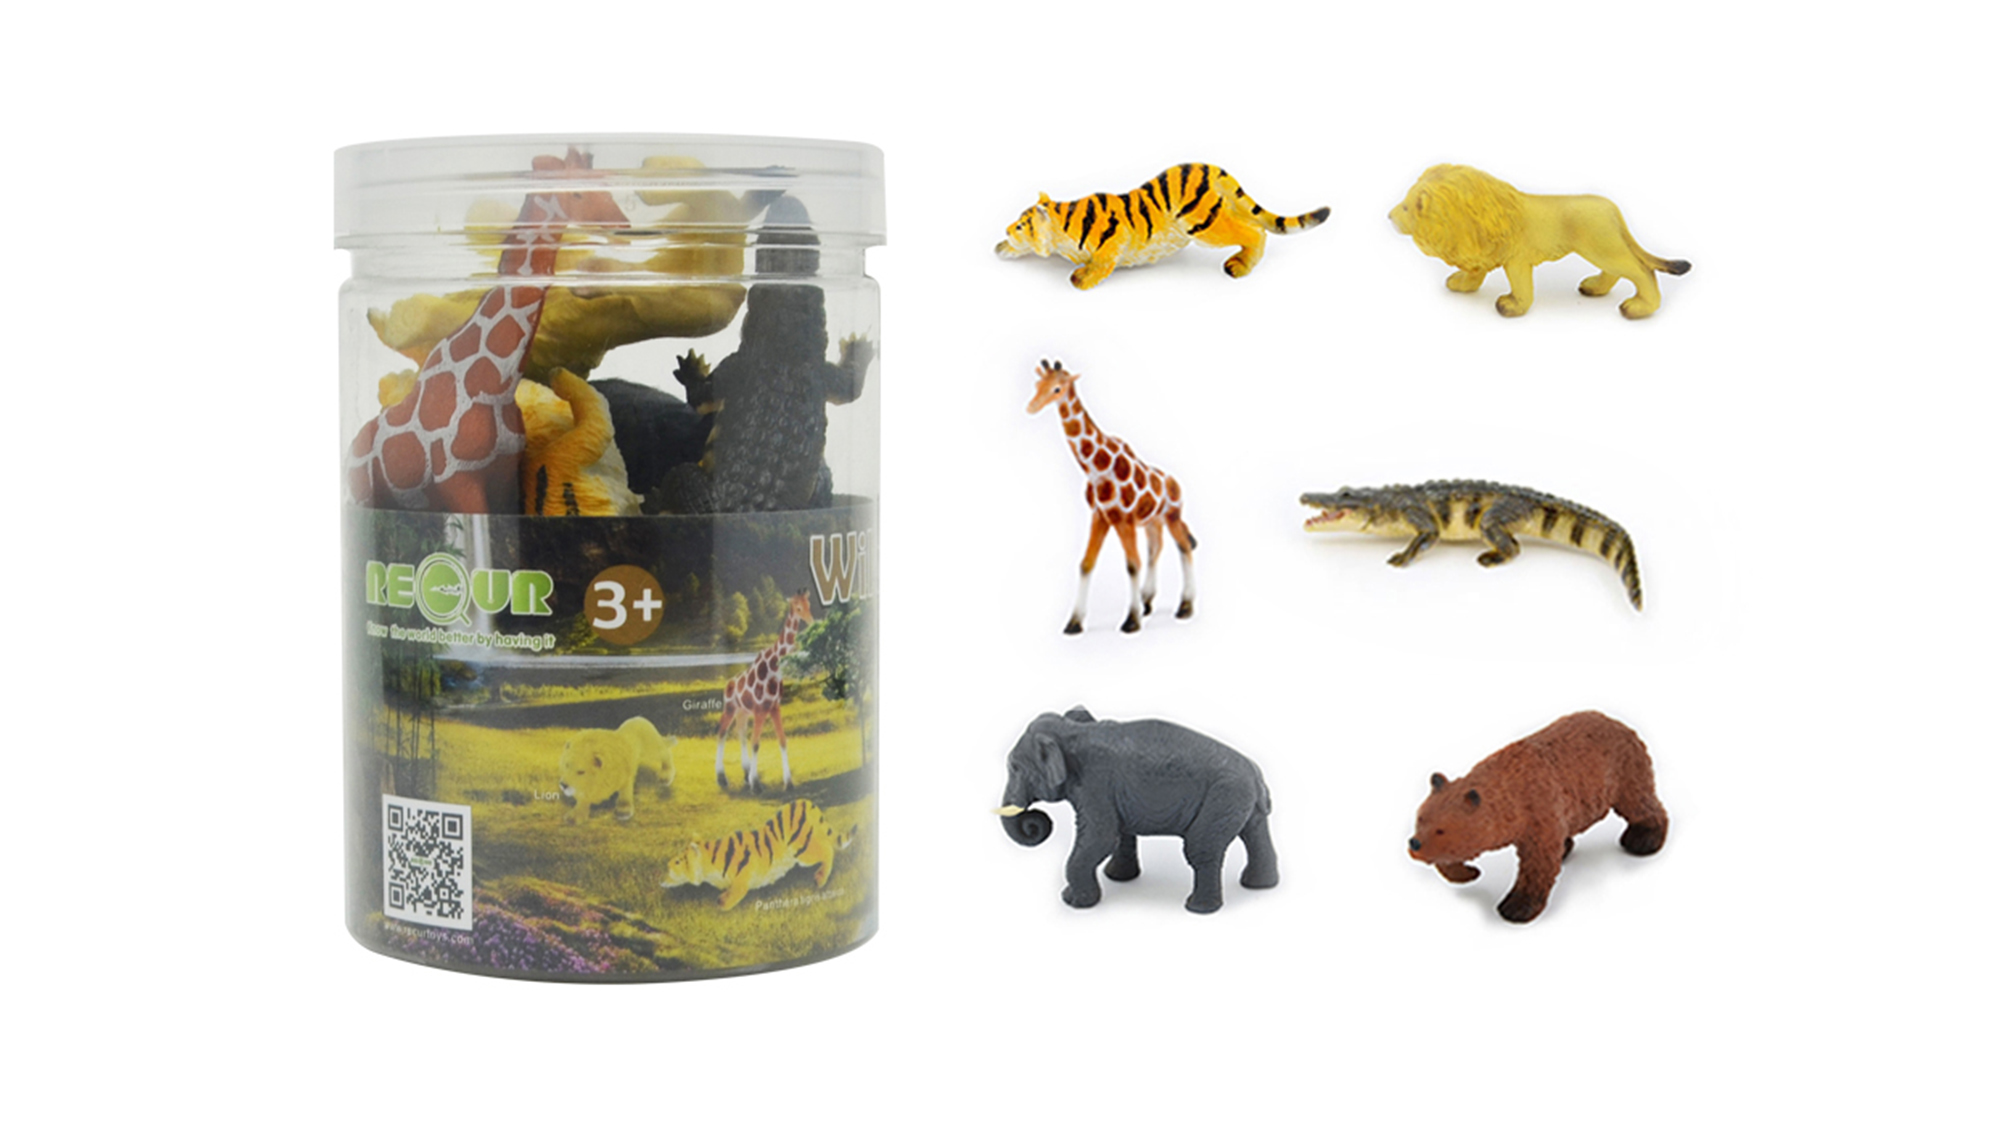 Animal toy model assorted wild animals playset A 6pcs